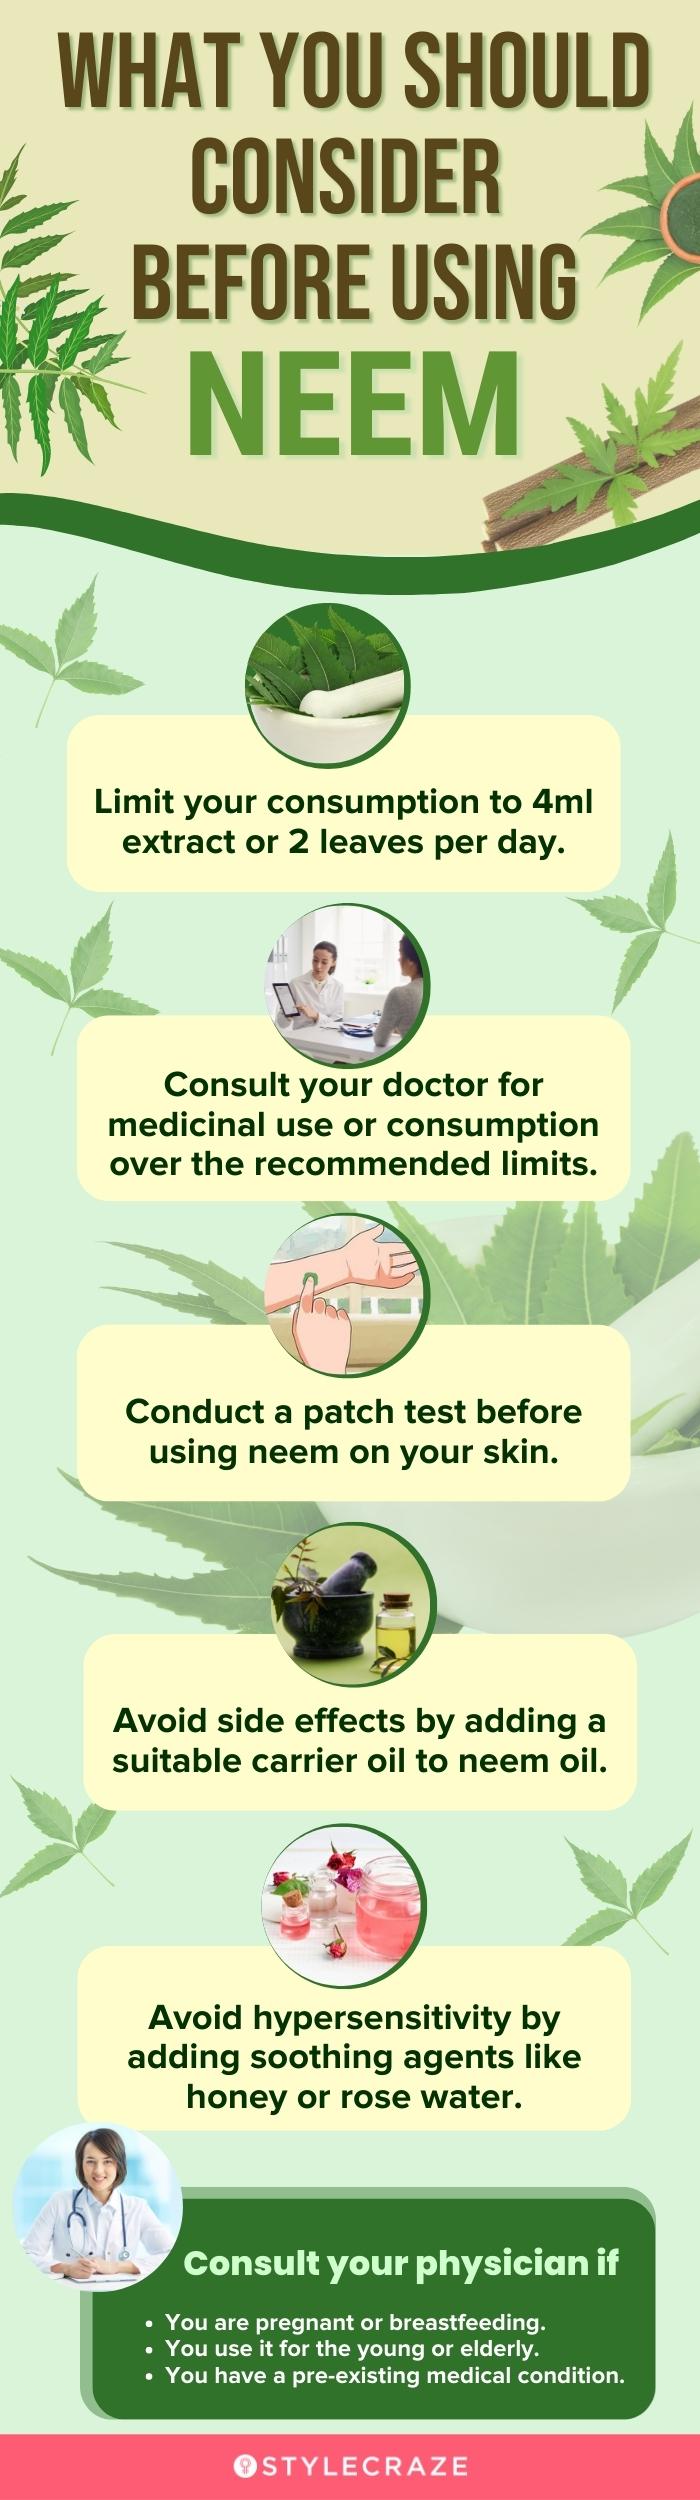 what you should consider before using neem (infographic)